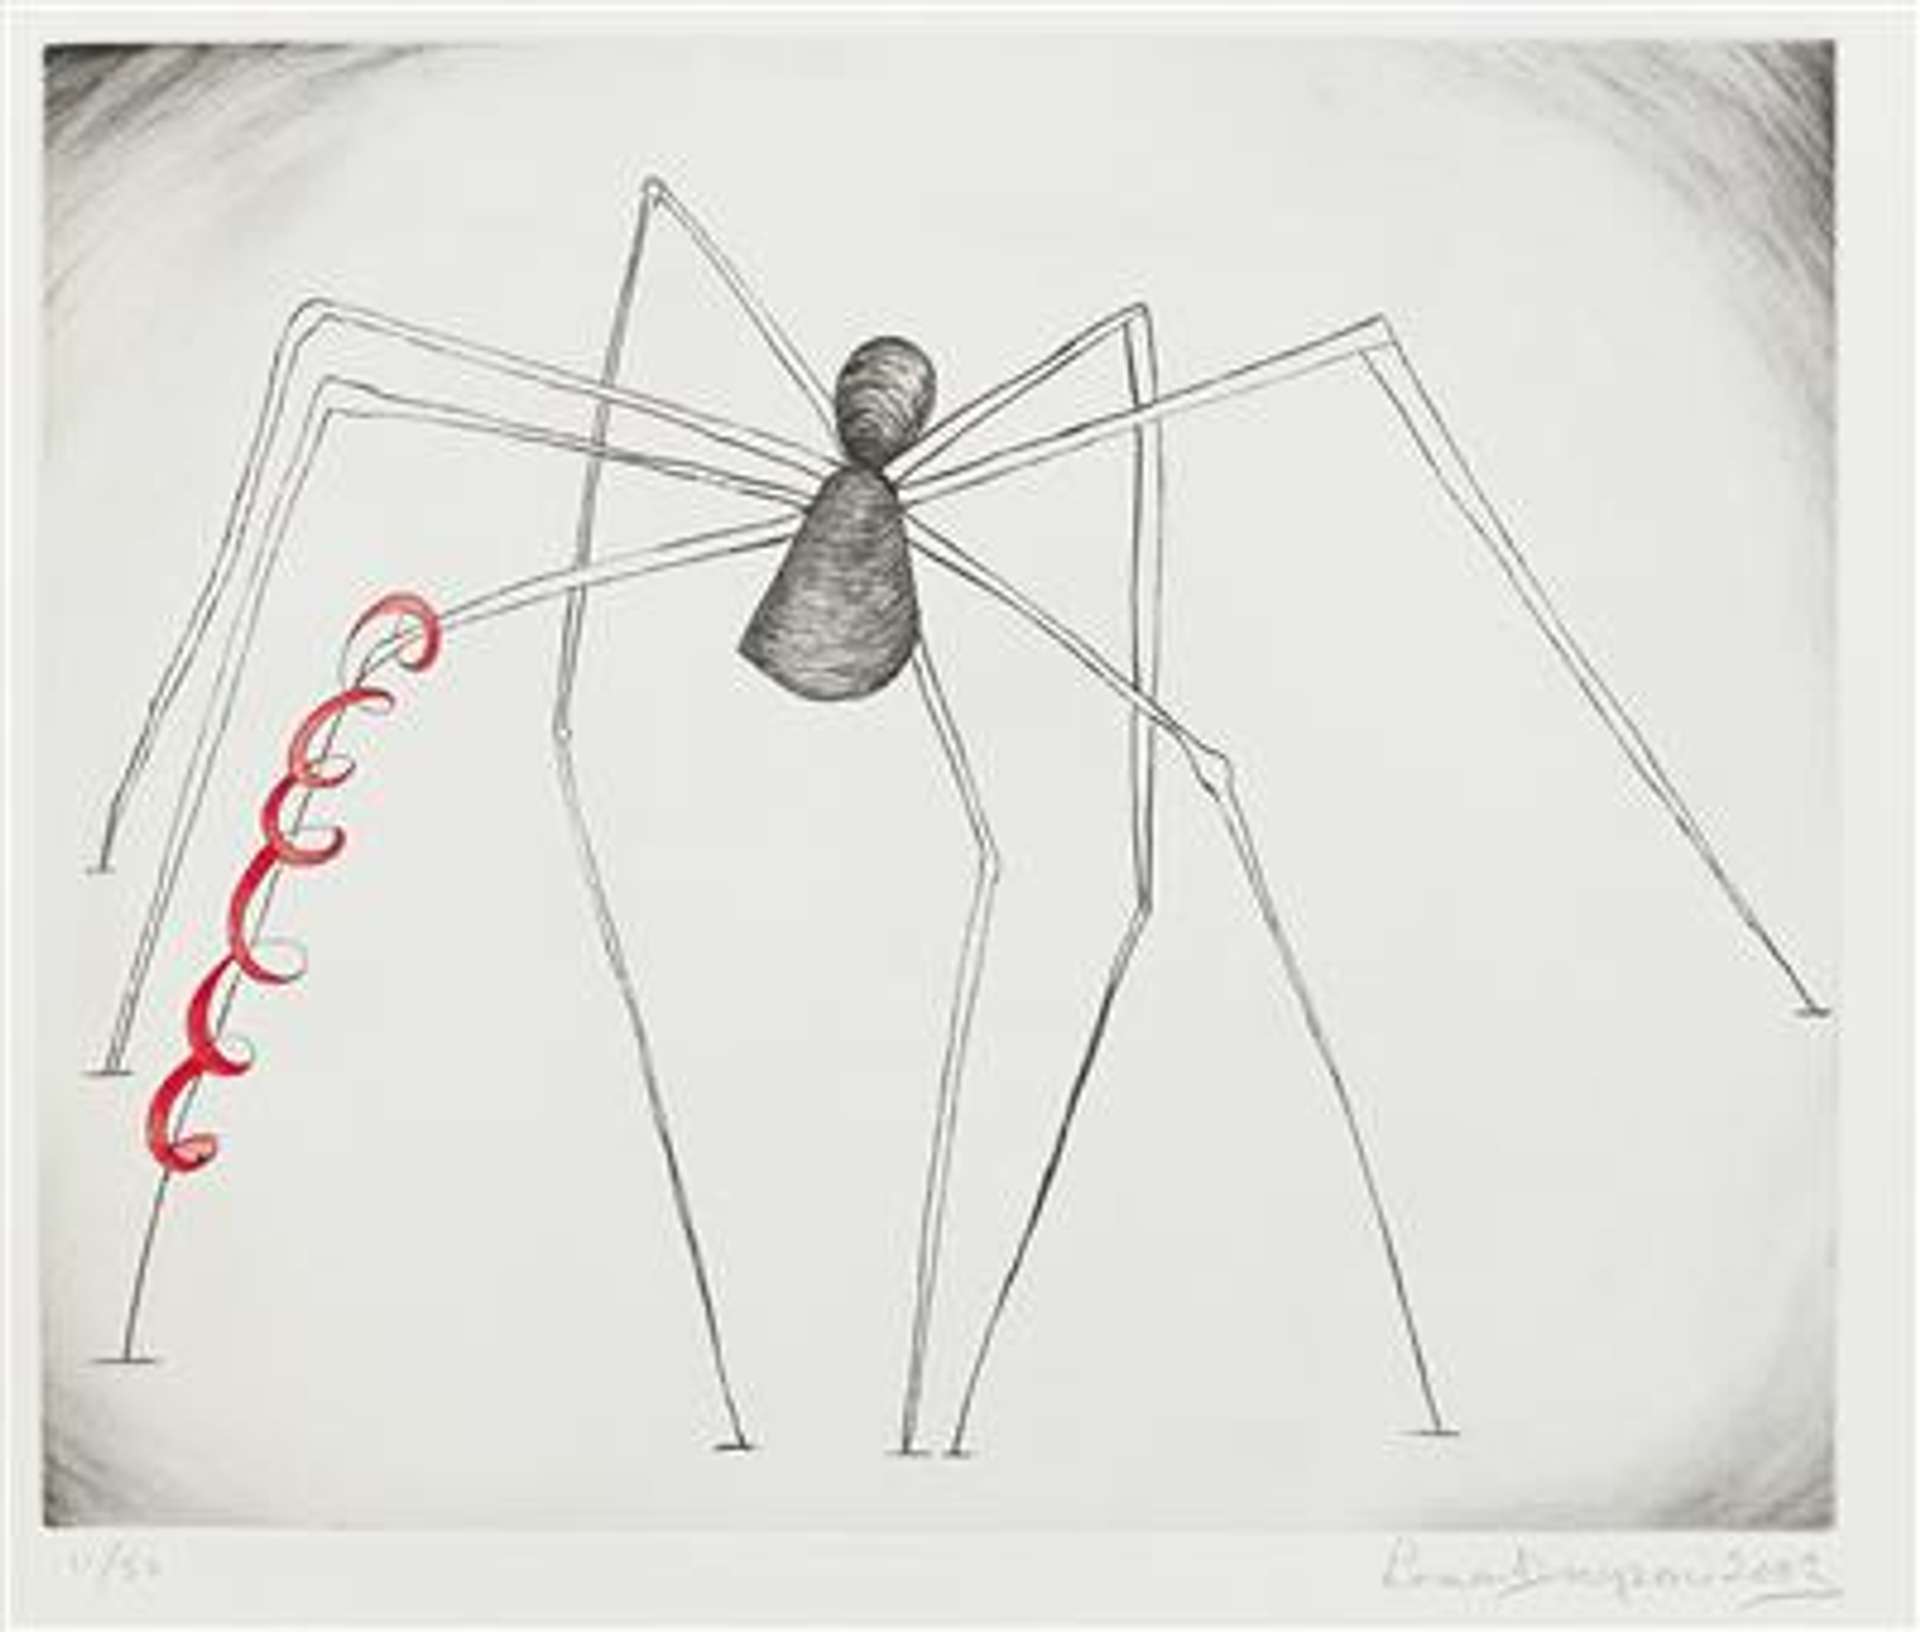 10 Facts About Louise Bourgeois